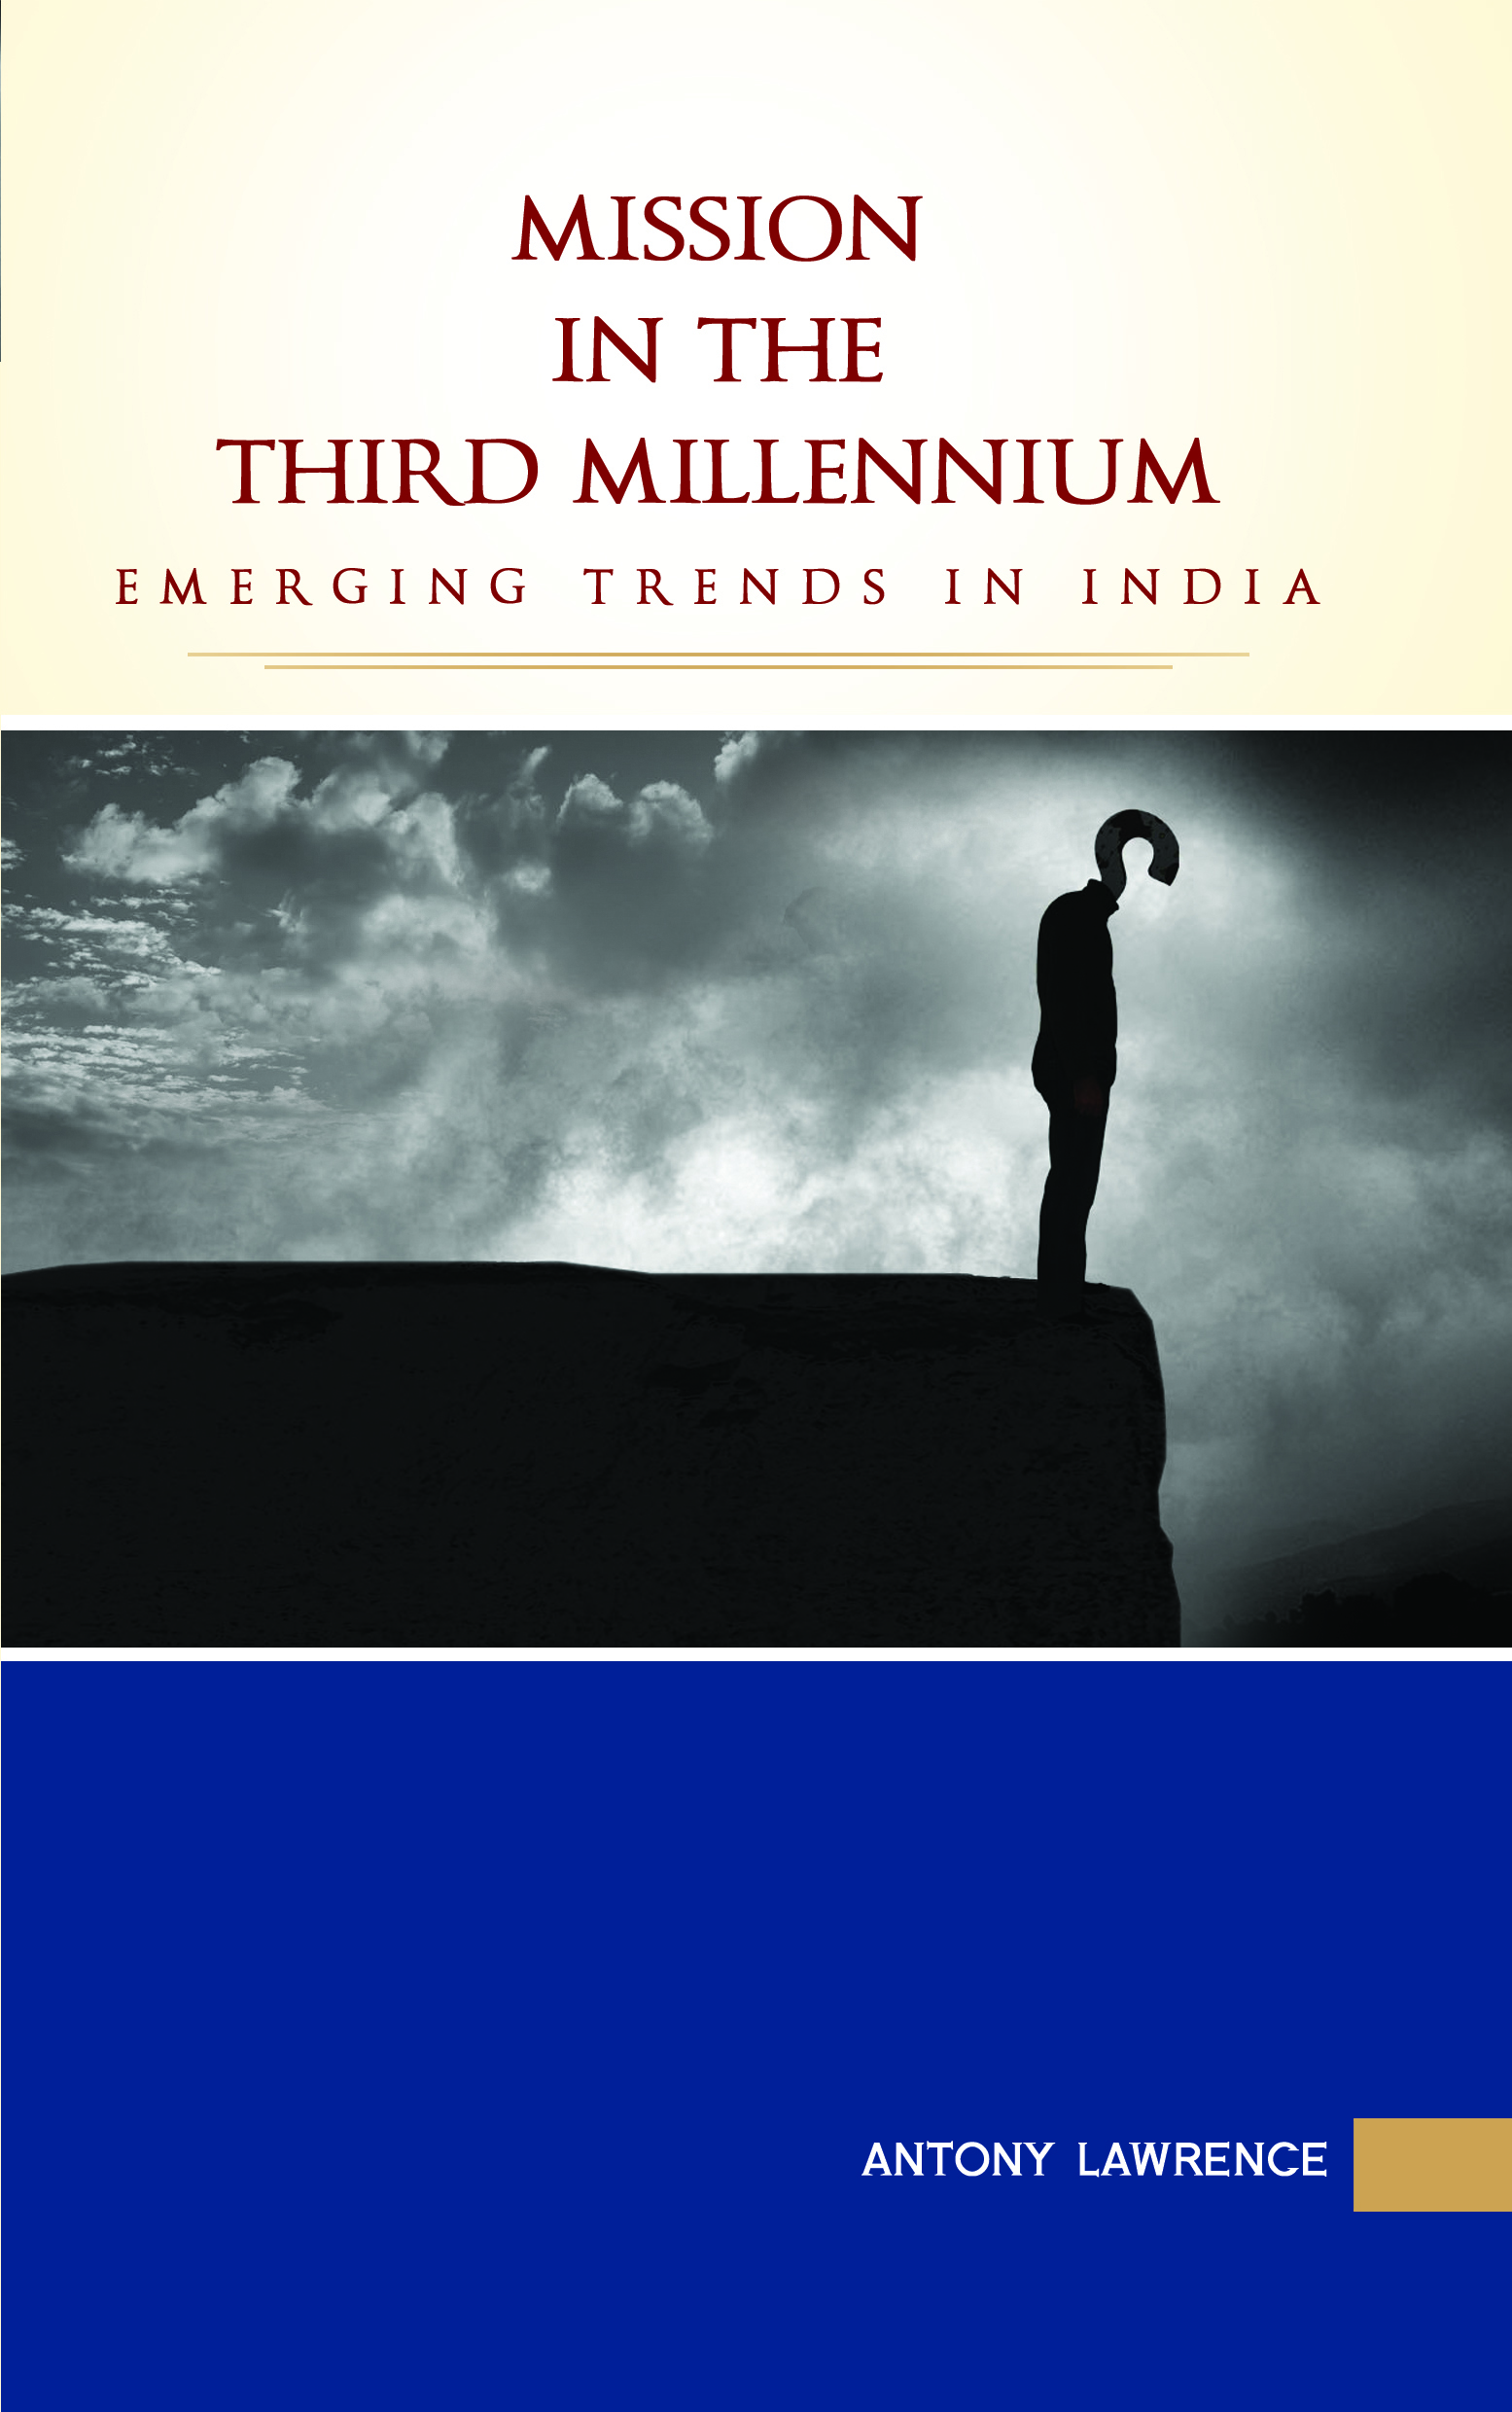 Frontlist | Mission in the Third Millennium: Emerging Trends in India